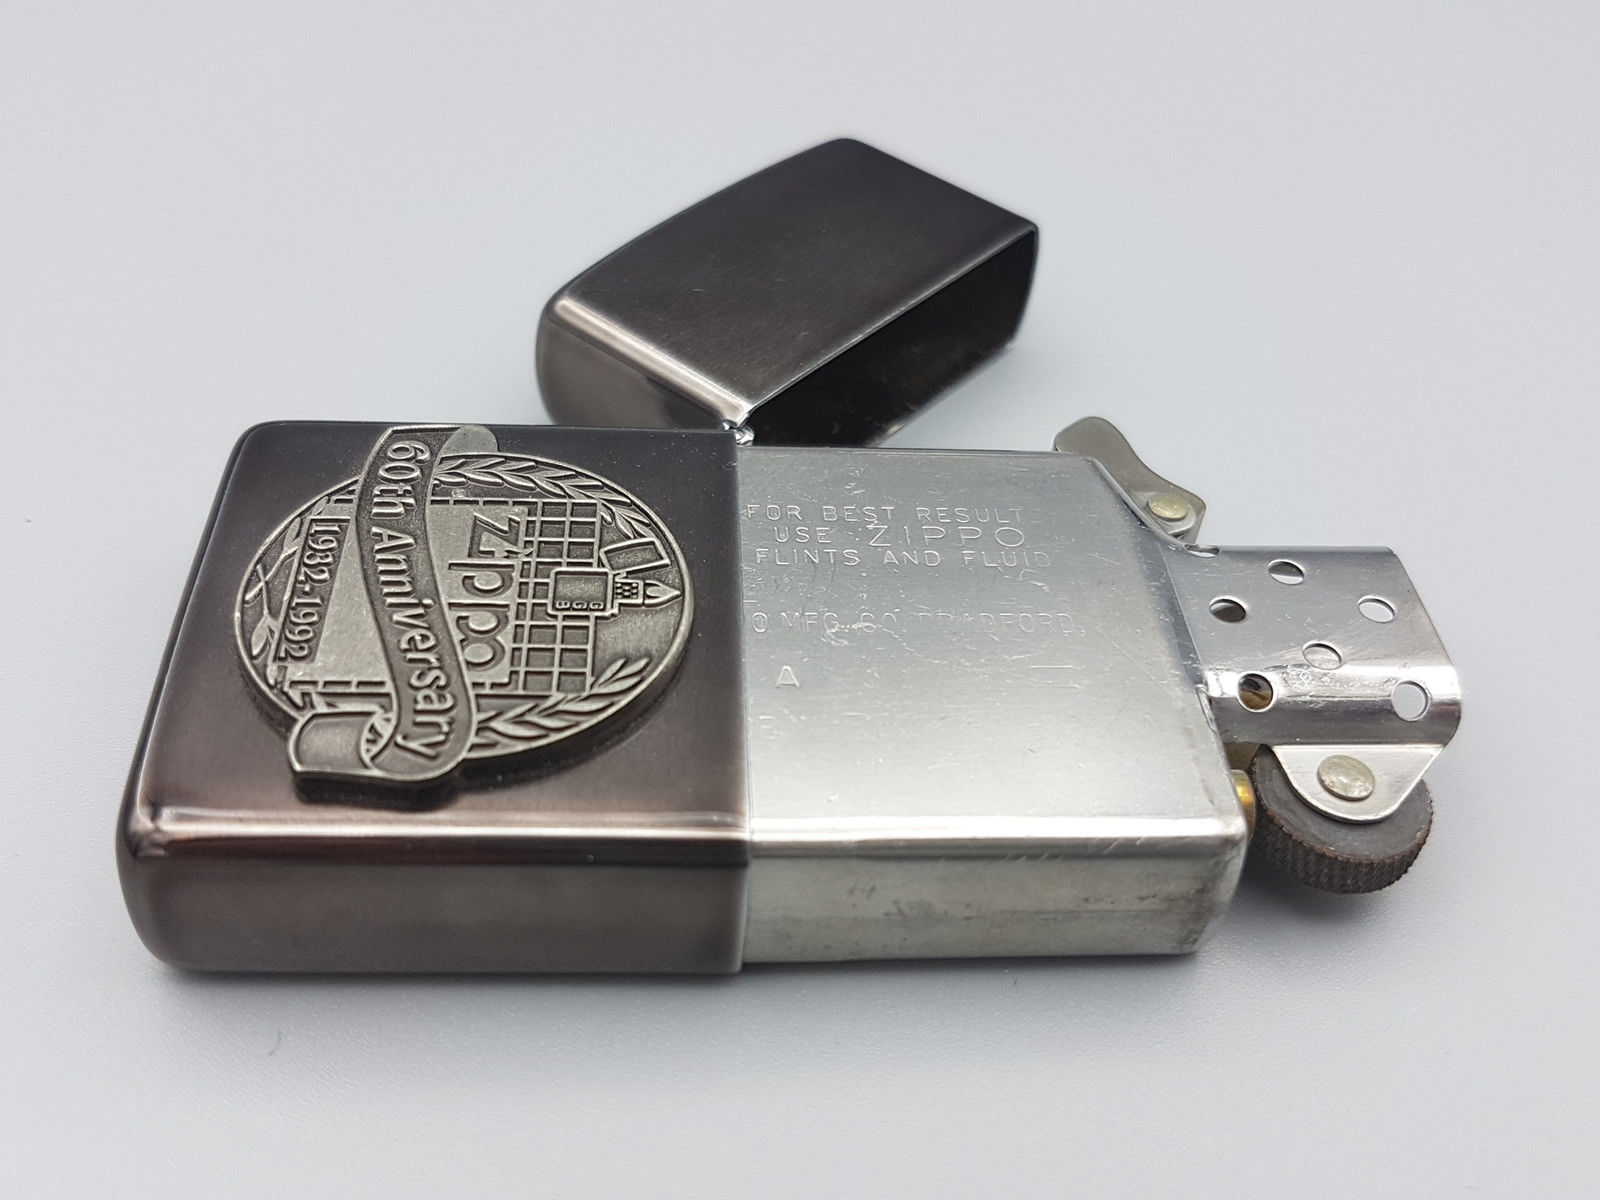 How much is 1932-1992 ZIPPO 60TH ANNIVERSARY Midnight Chrome Lighter